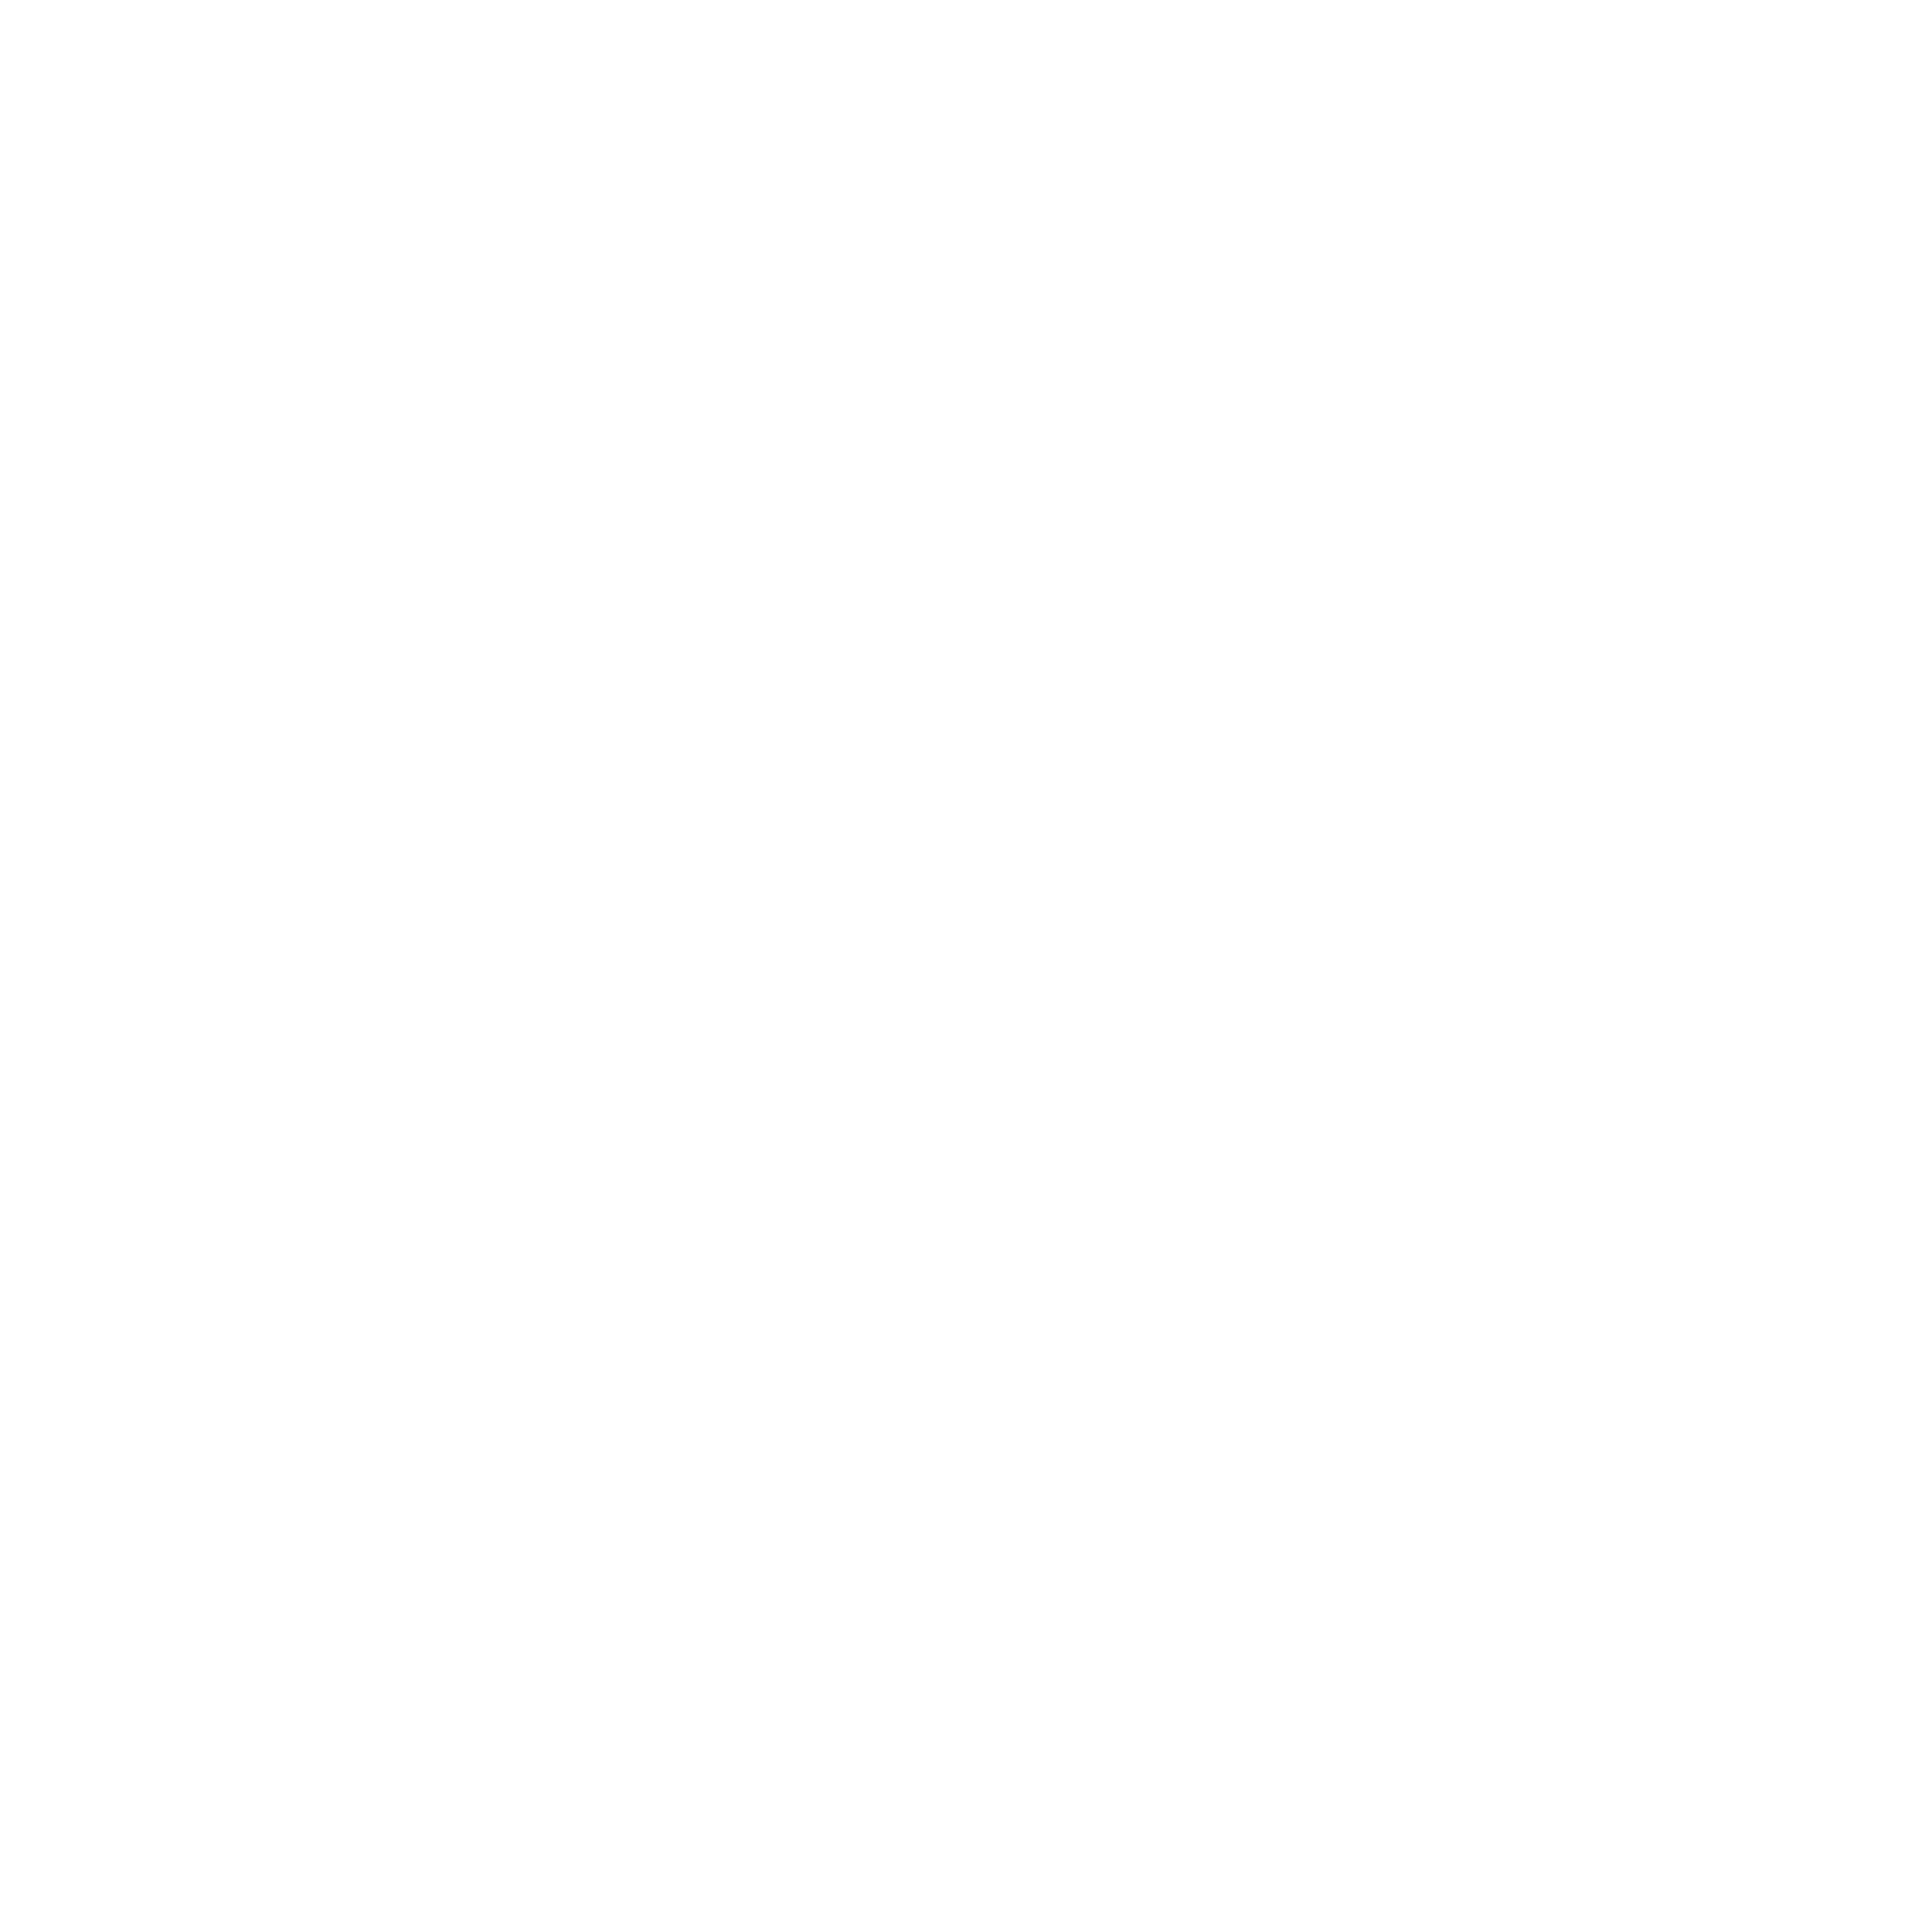 SOUTHERN ROOTS REAL ESTATE